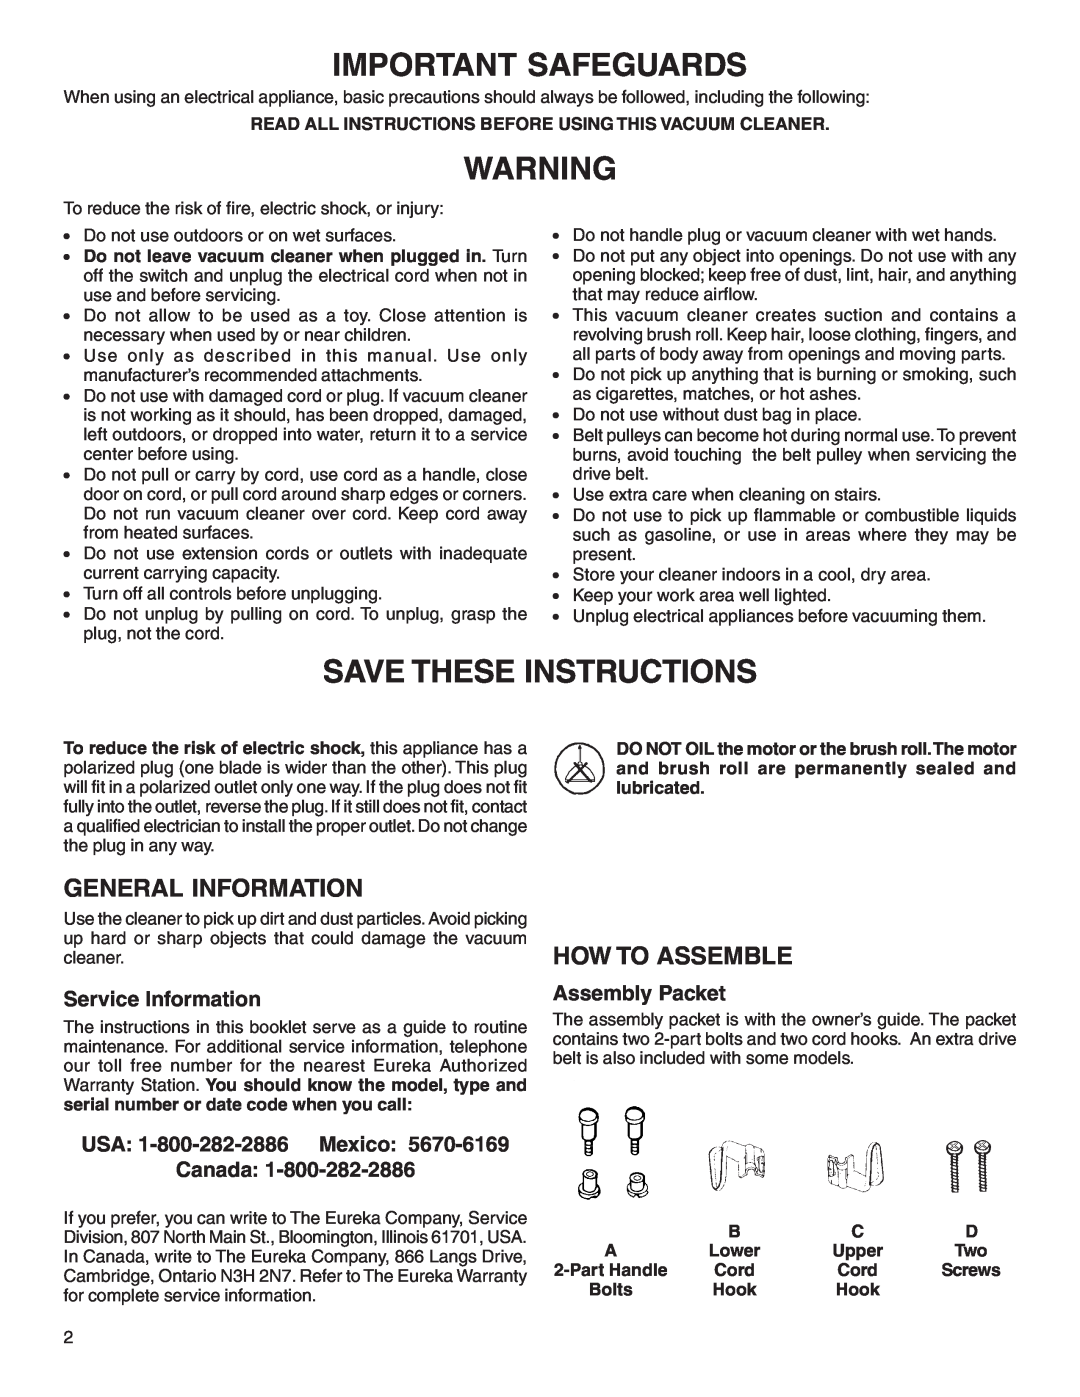 Eureka 1950 Important Safeguards, Save These Instructions, General Information, How To Assemble, Service Information 